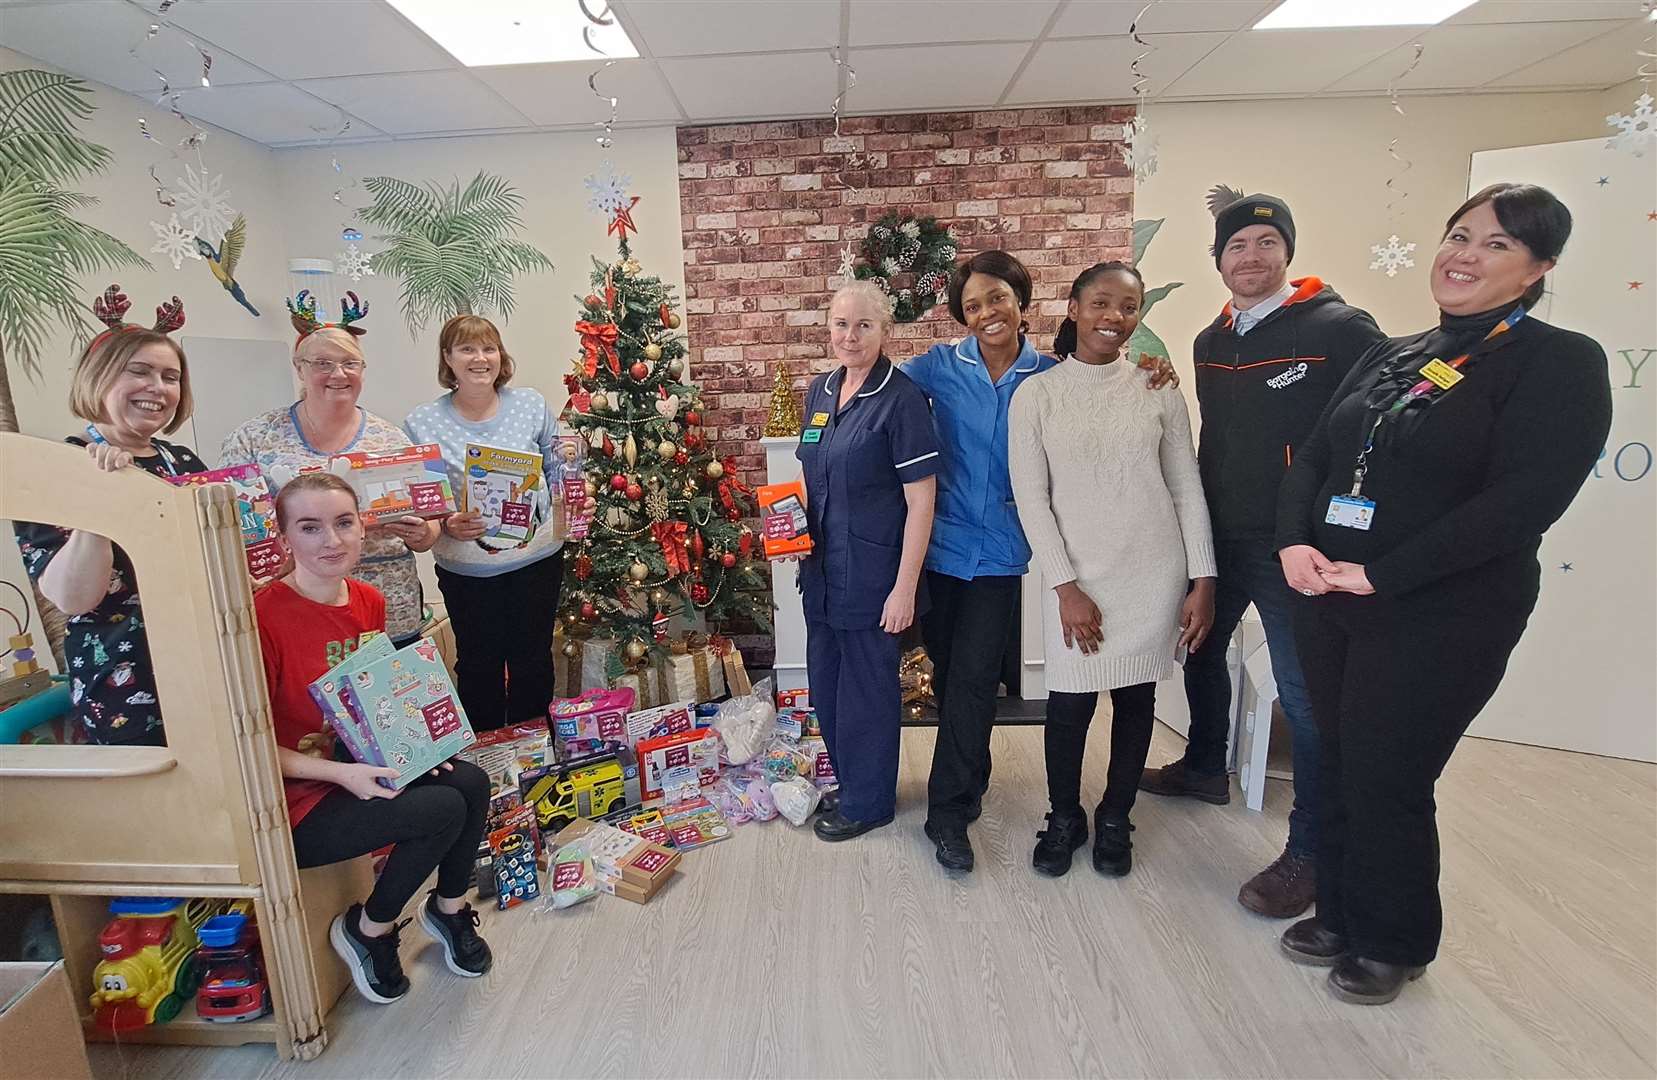 Staff at the William Harvey Hospital in Ashford receive donations from kmfm's Give A Gift Appeal